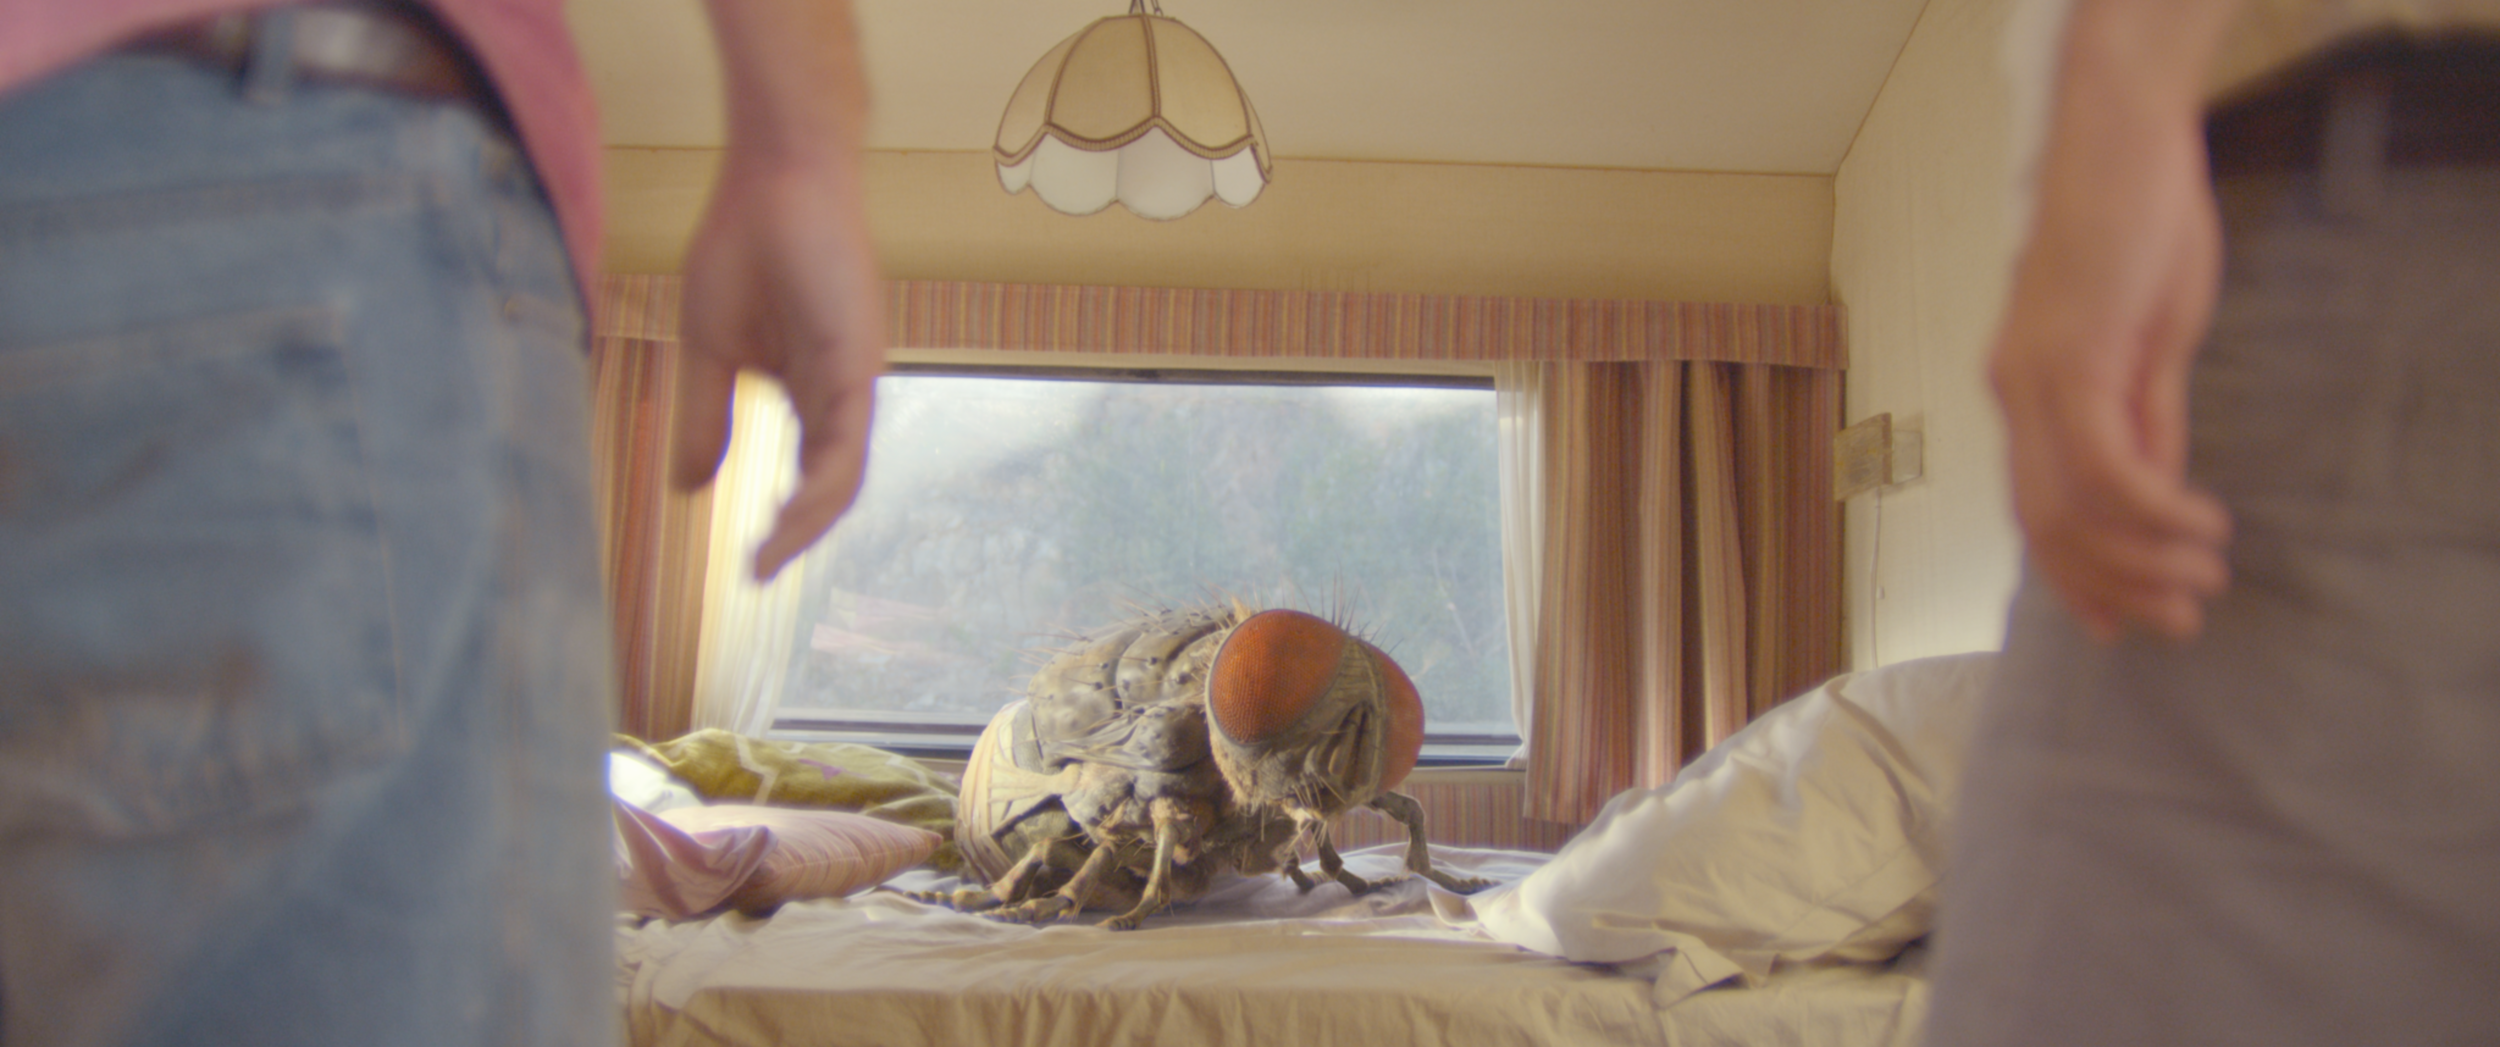 Mandibles Trailer Has Two Idiots Adopting a Giant Pet Insect